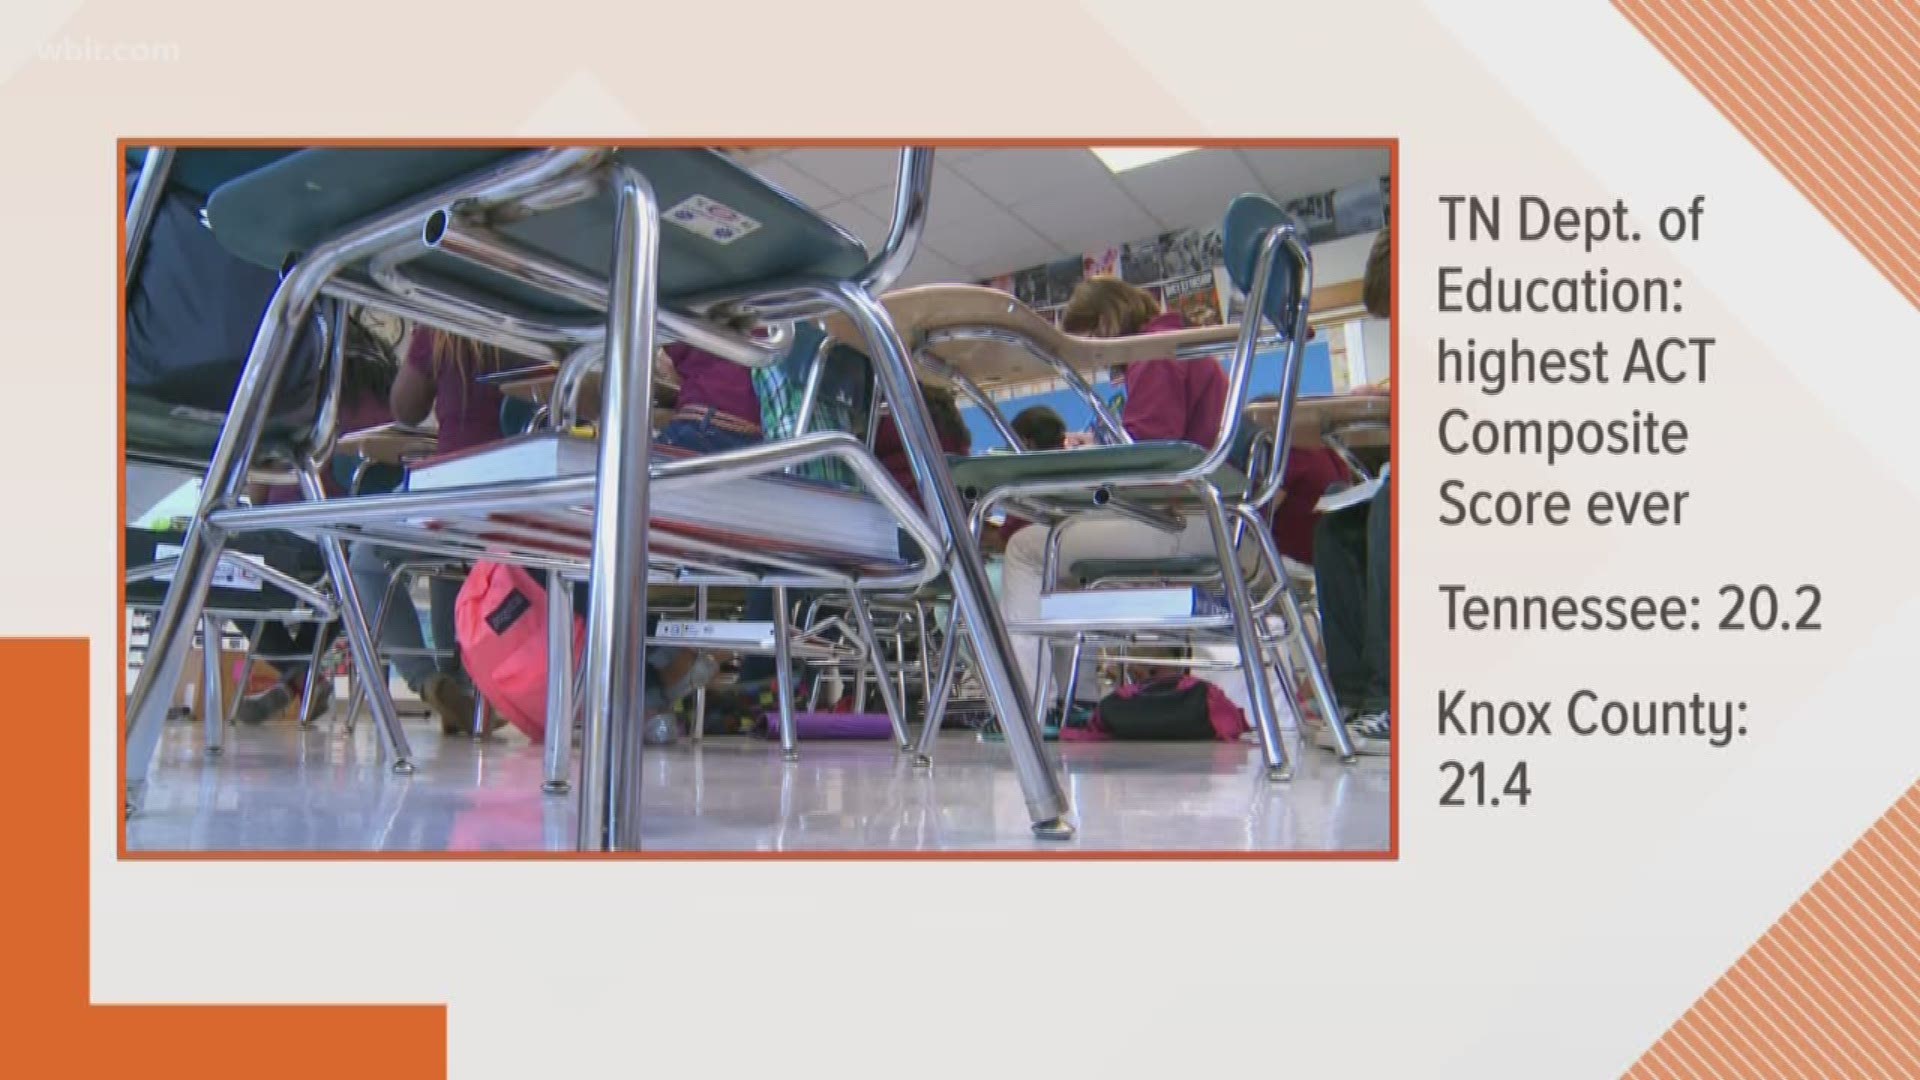 The Tennessee Department of Education says students across the state had the highest average ACT composite score ever.